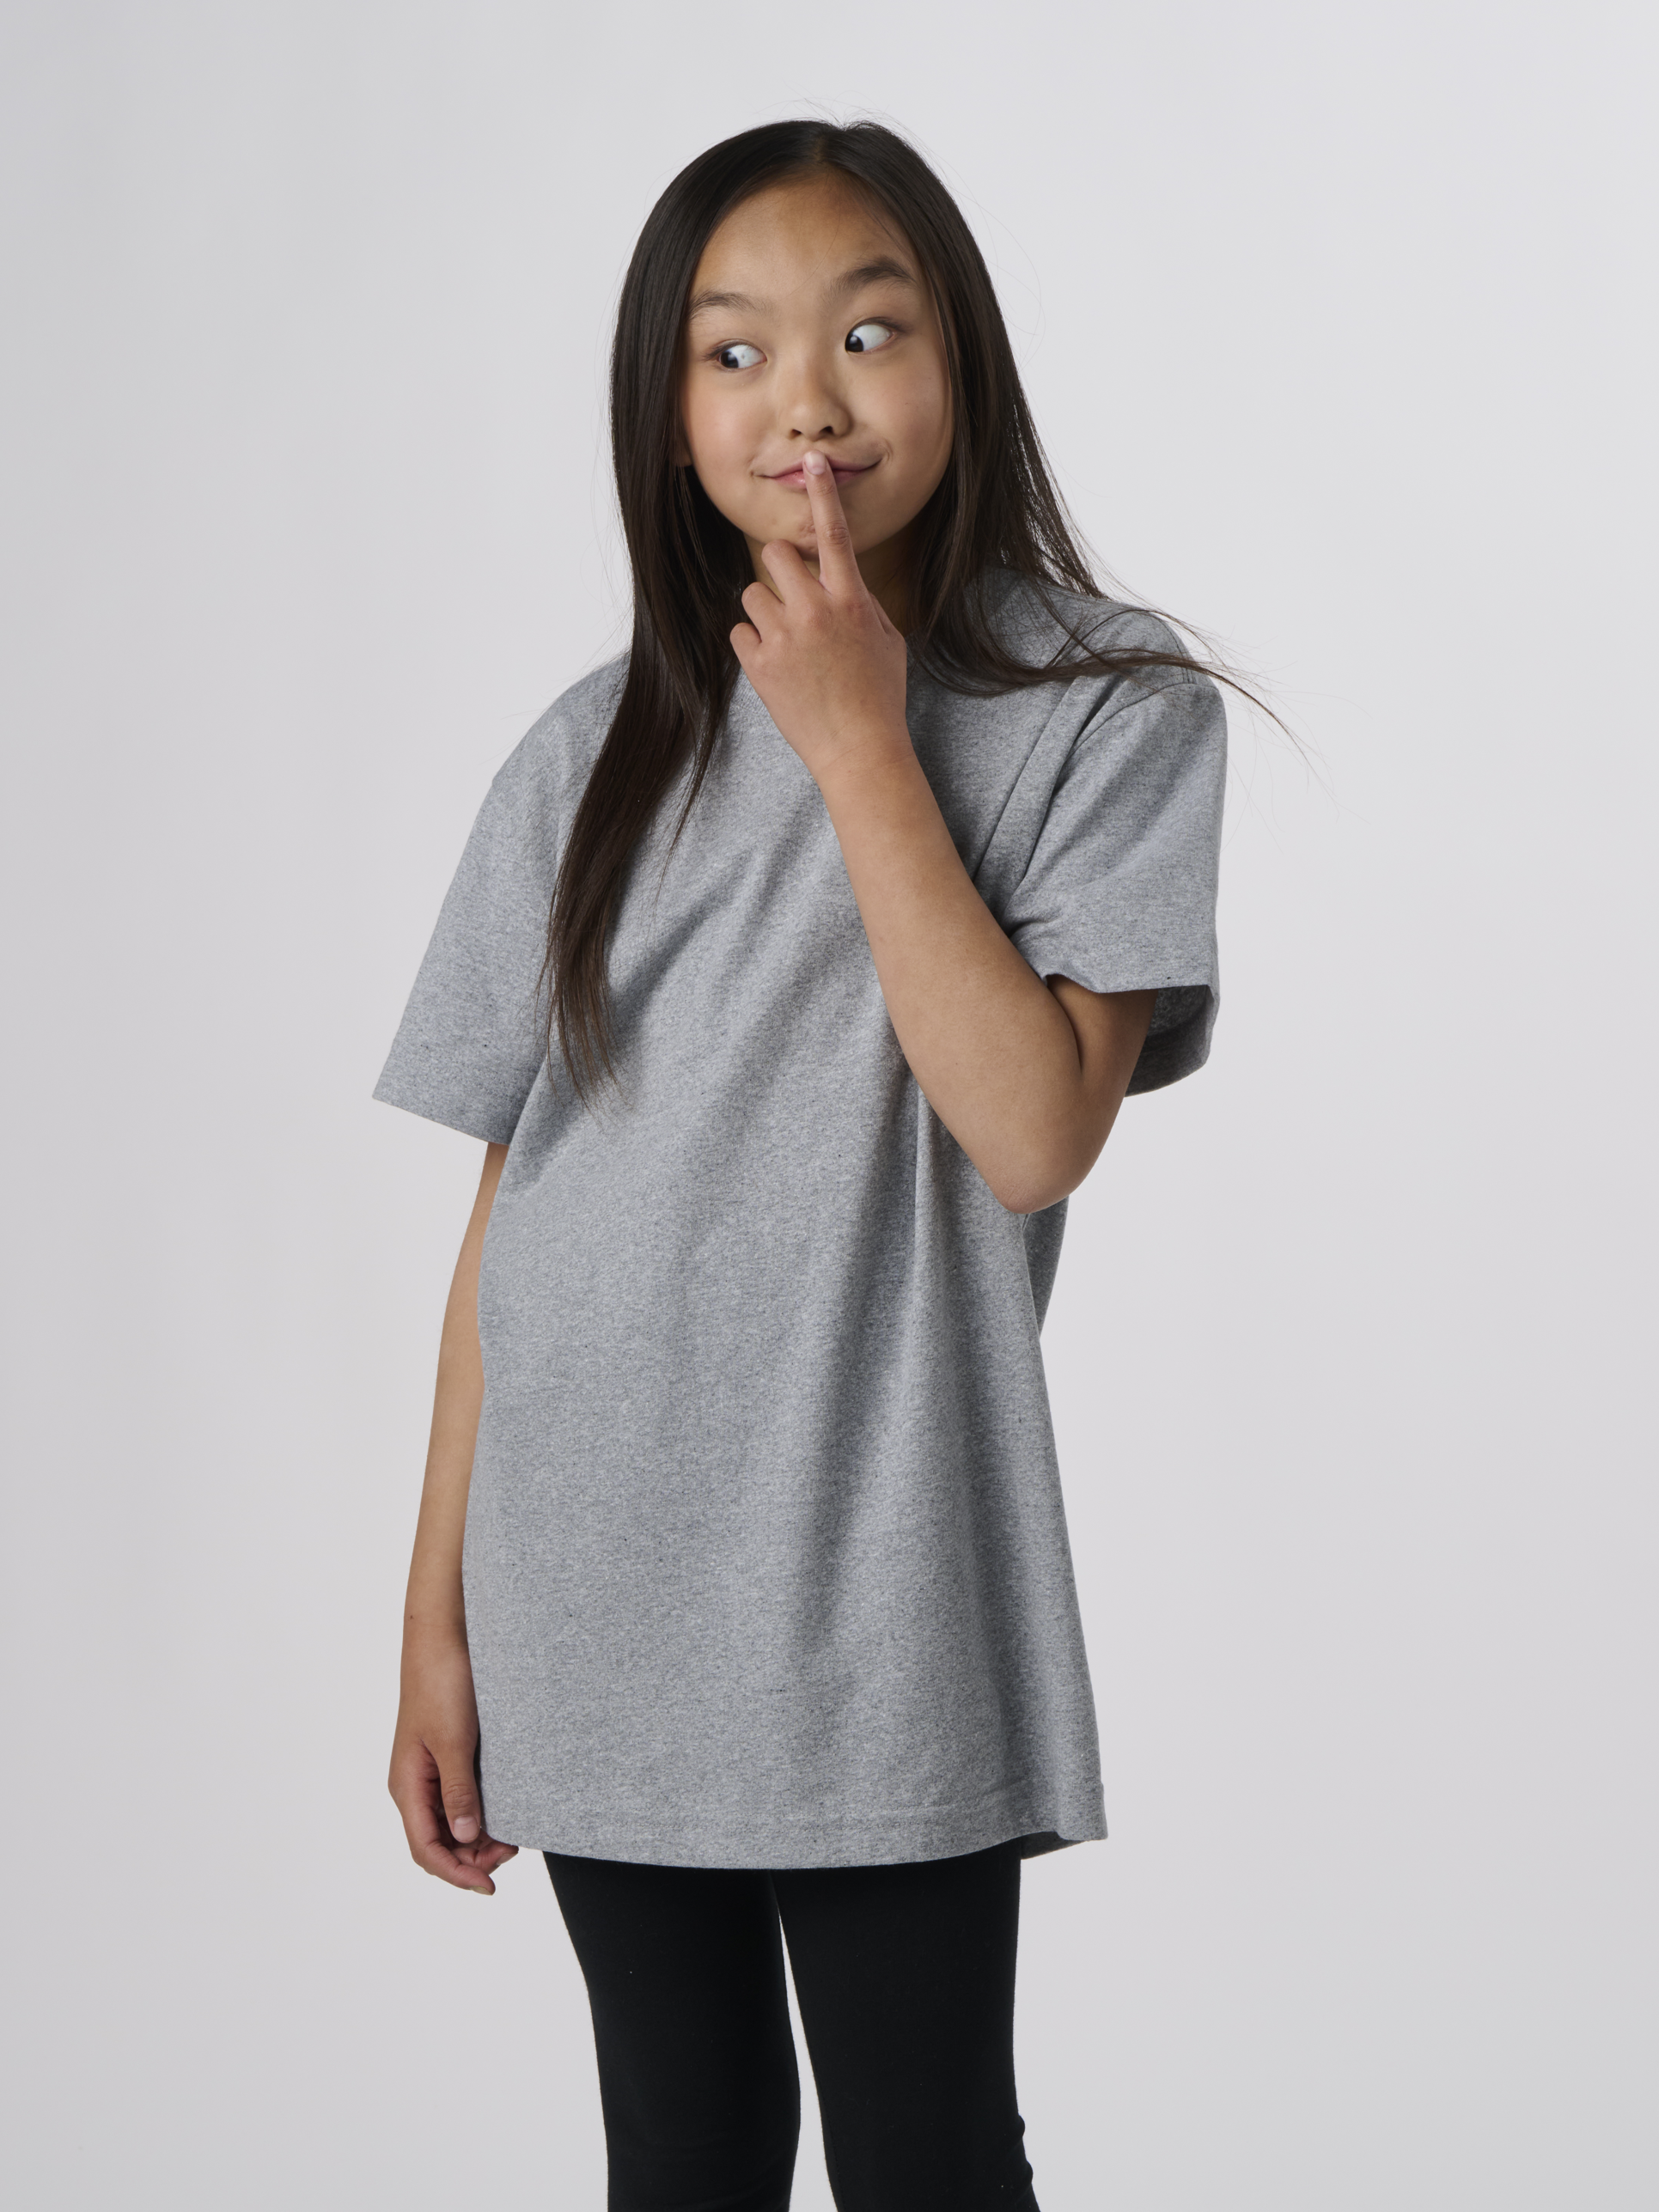 RECOVER_EY100_ECOYOUTHSHORTSLEEVETSHIRT_ASH_FRONT.png